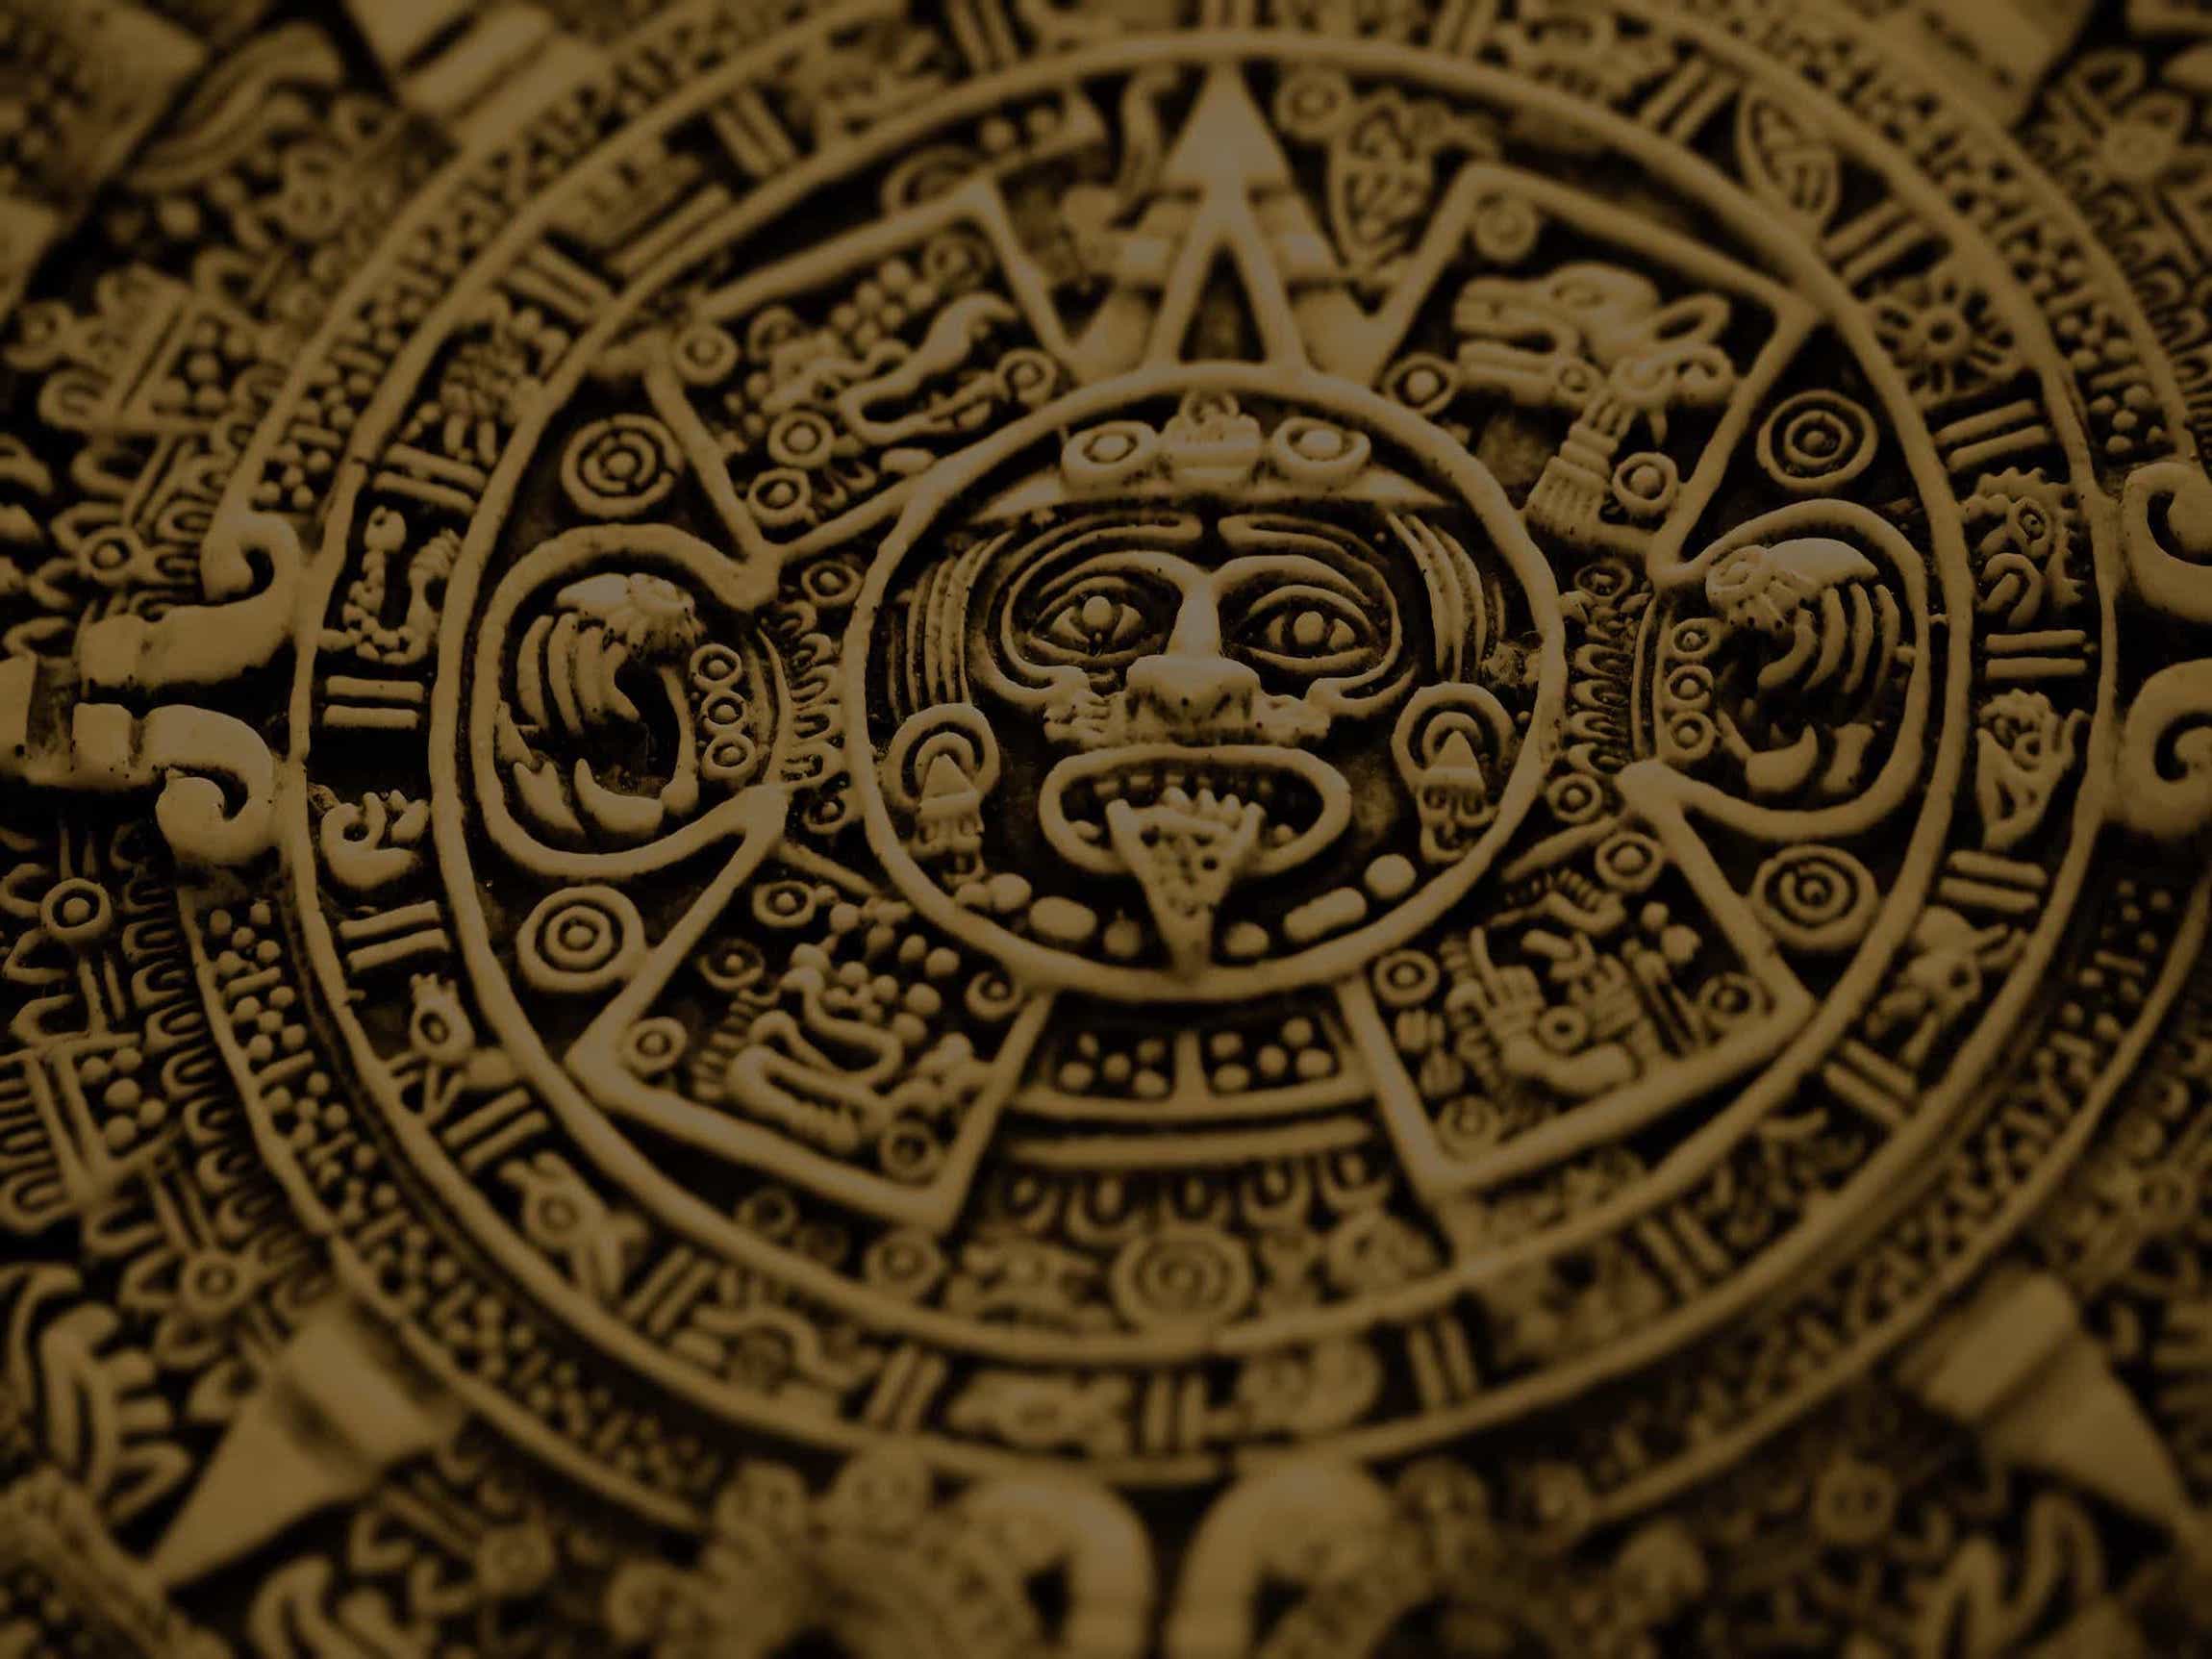 Tonalama class ancient aztec calendar and astrology from Mexico taught by Susana Xochitlquetzalli following the Moondance Tradition